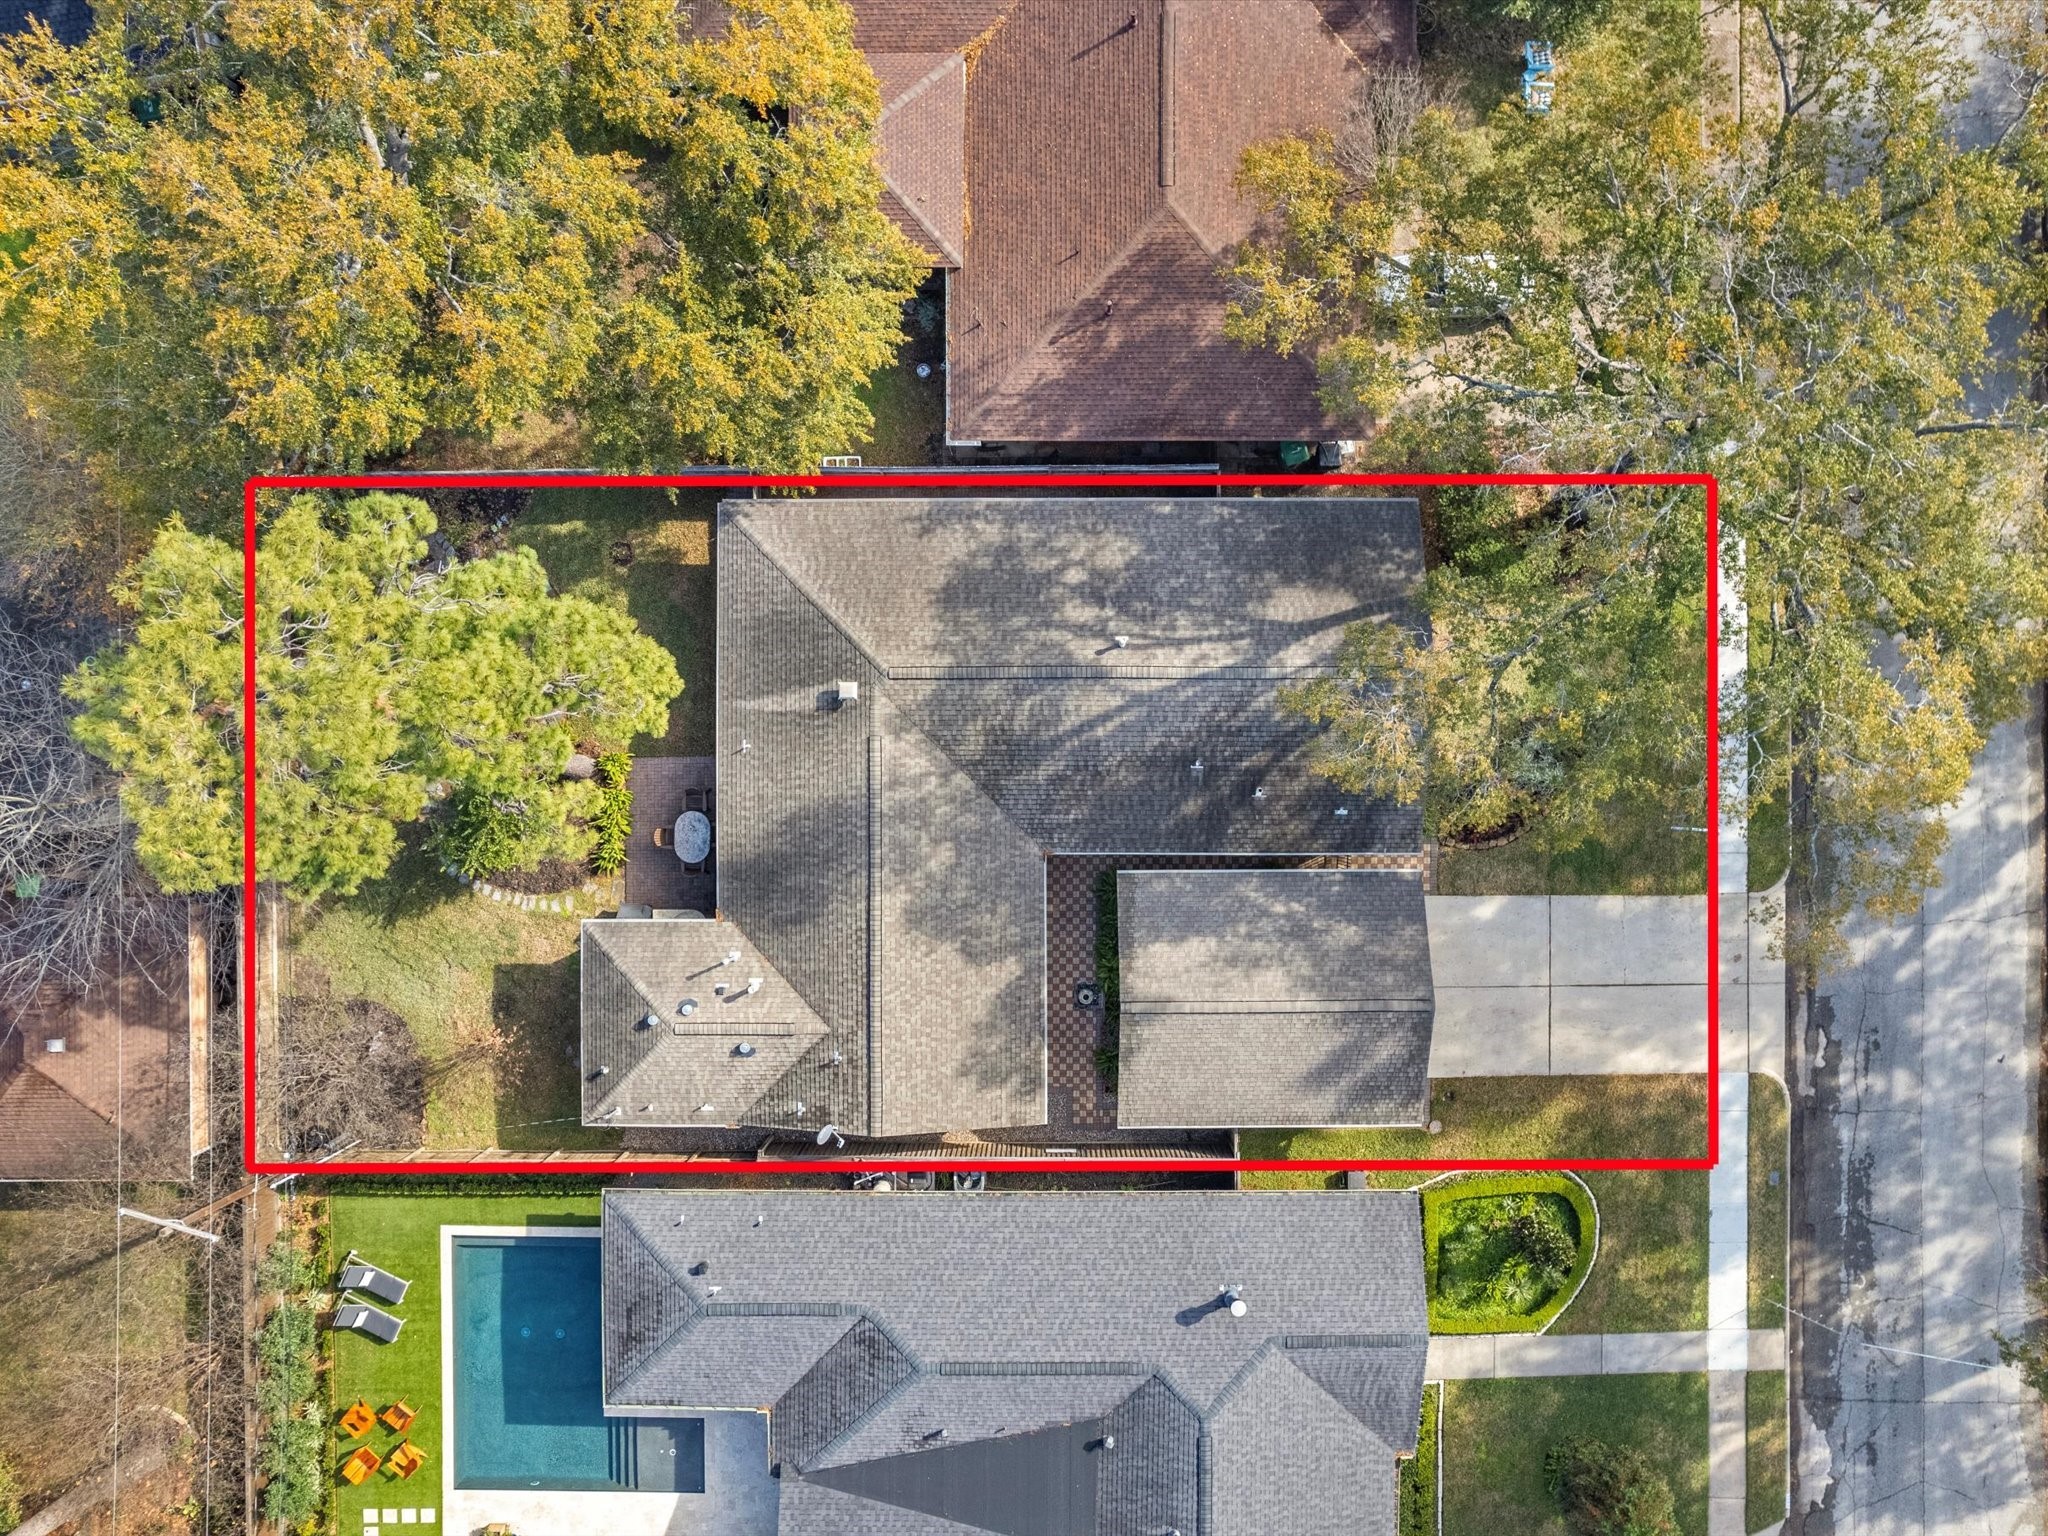 An aerial view of the boundaries of the property. Notice how much backyard space there is!